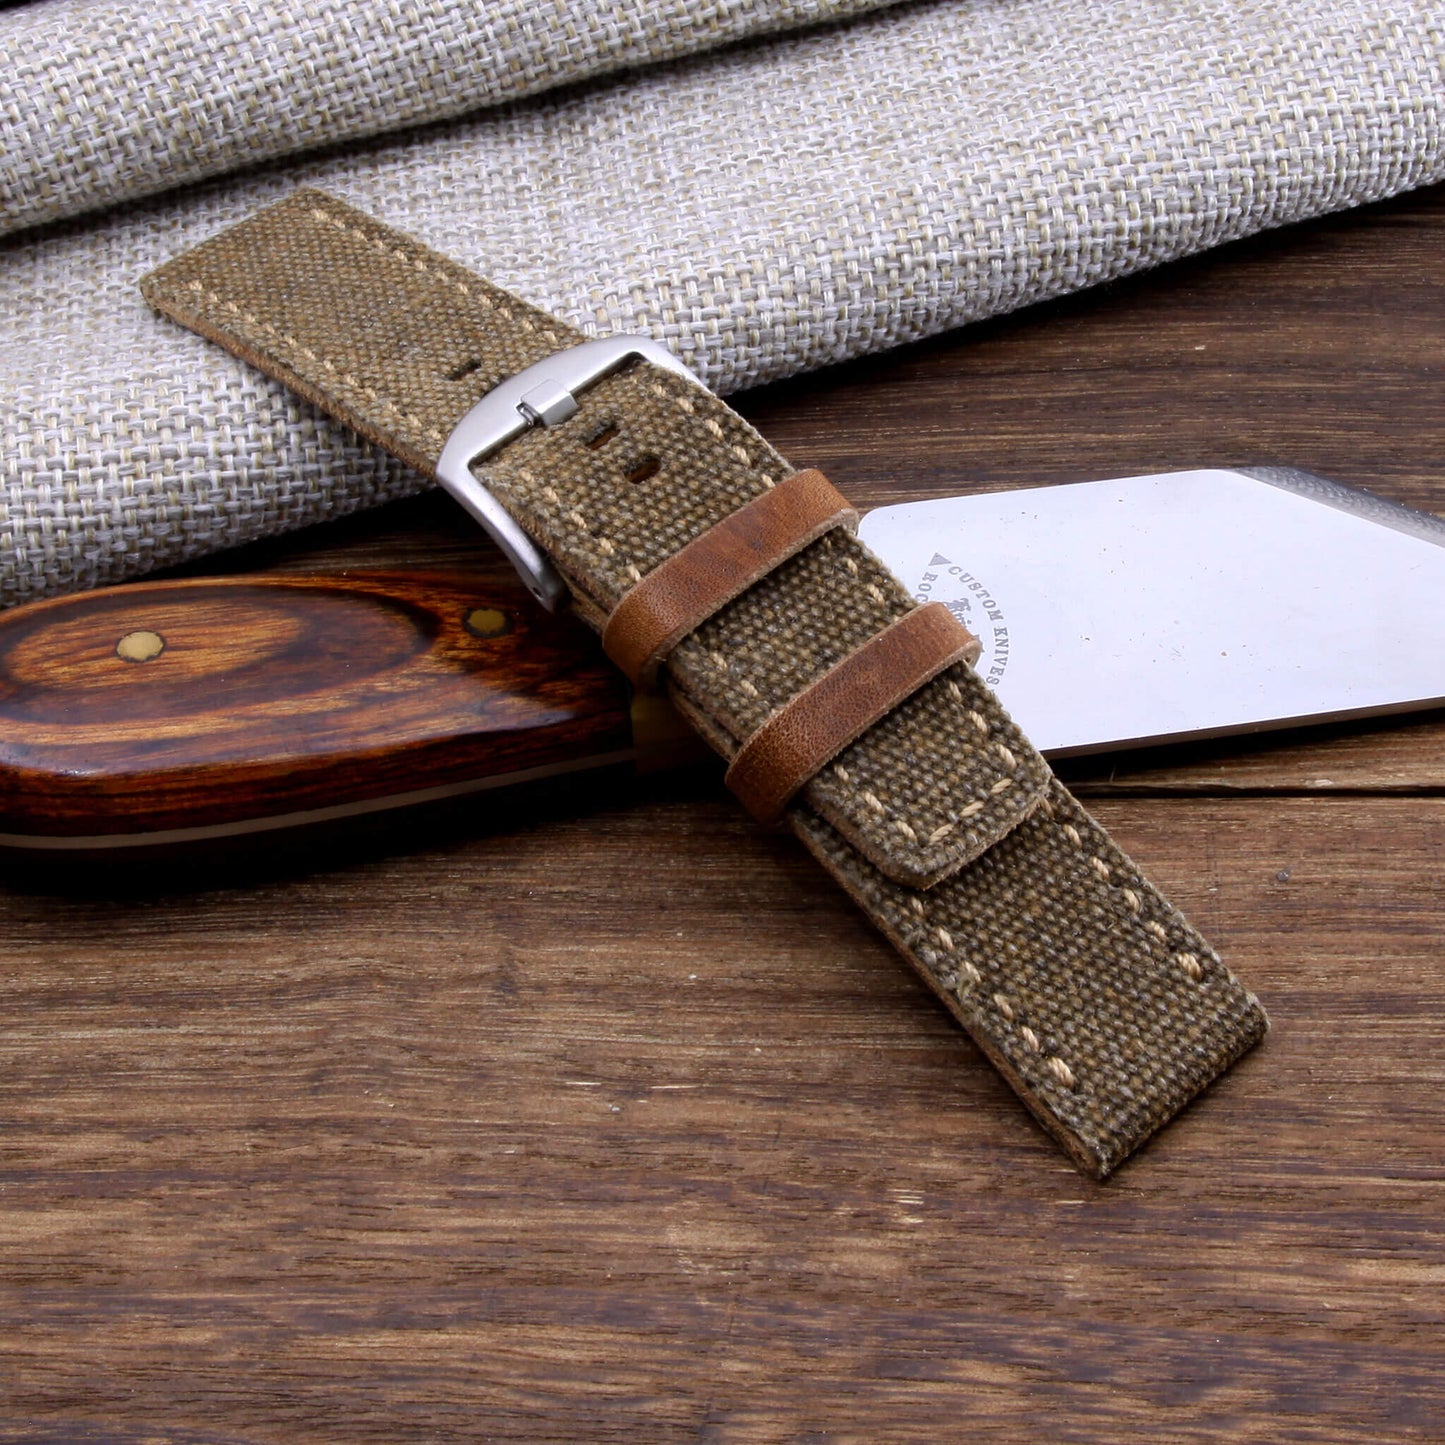 4th VIew of 2-Piece Full Stitch Leather Watch Strap, made with Rustic Brown Canvas and Italian veg-tanned leather lining, handcrafted by Cozy Handmade